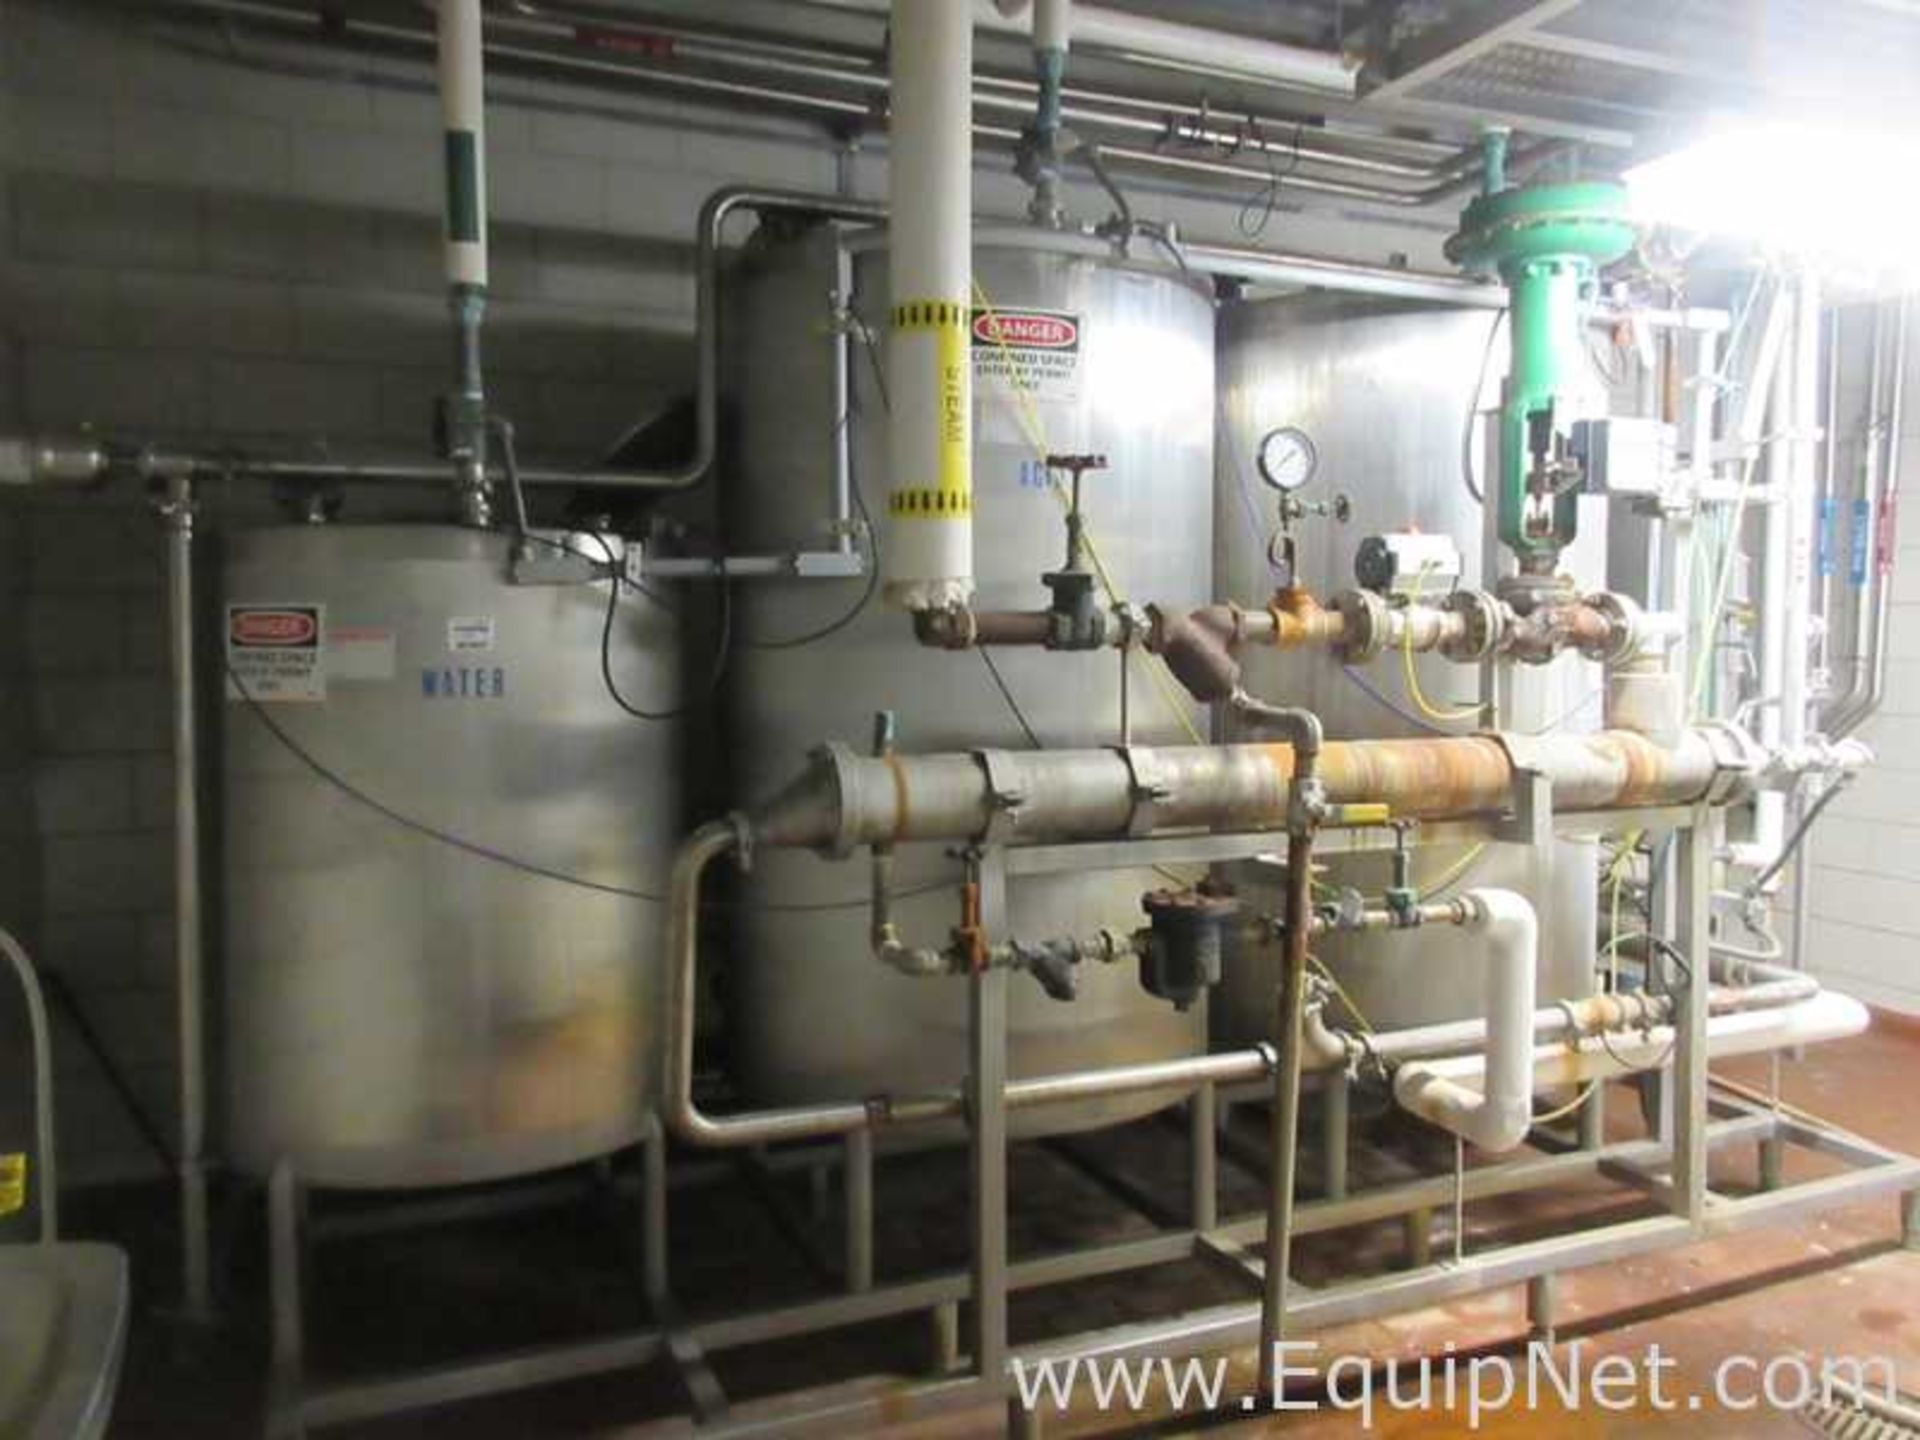 EQUIPNET LISTING #775980; REMOVAL COST: $15,754.00; DESCRIPTION: CIP System With Three Tanks, - Image 2 of 17